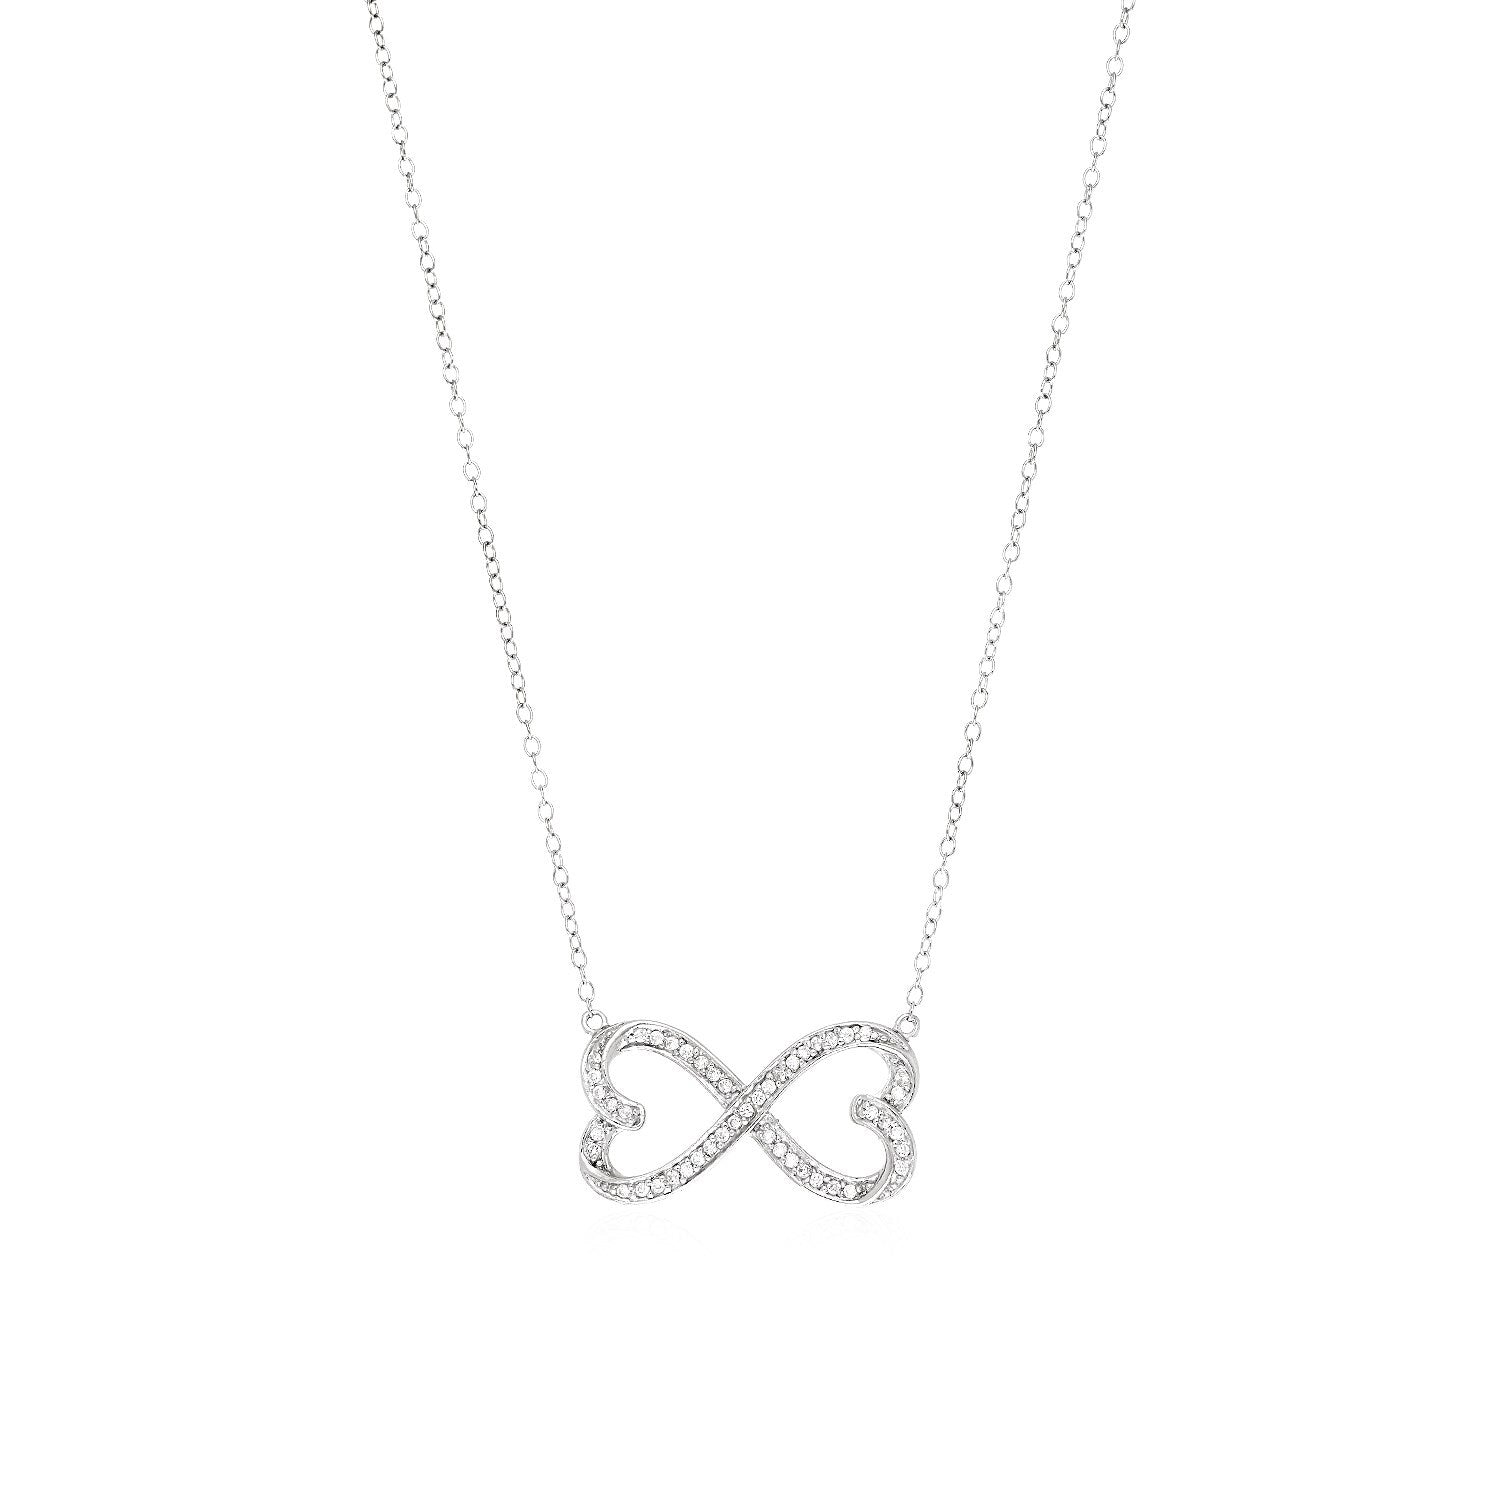 Double Heart Infinity Necklace with Cubic Zirconia in Sterling Silver, size 18''